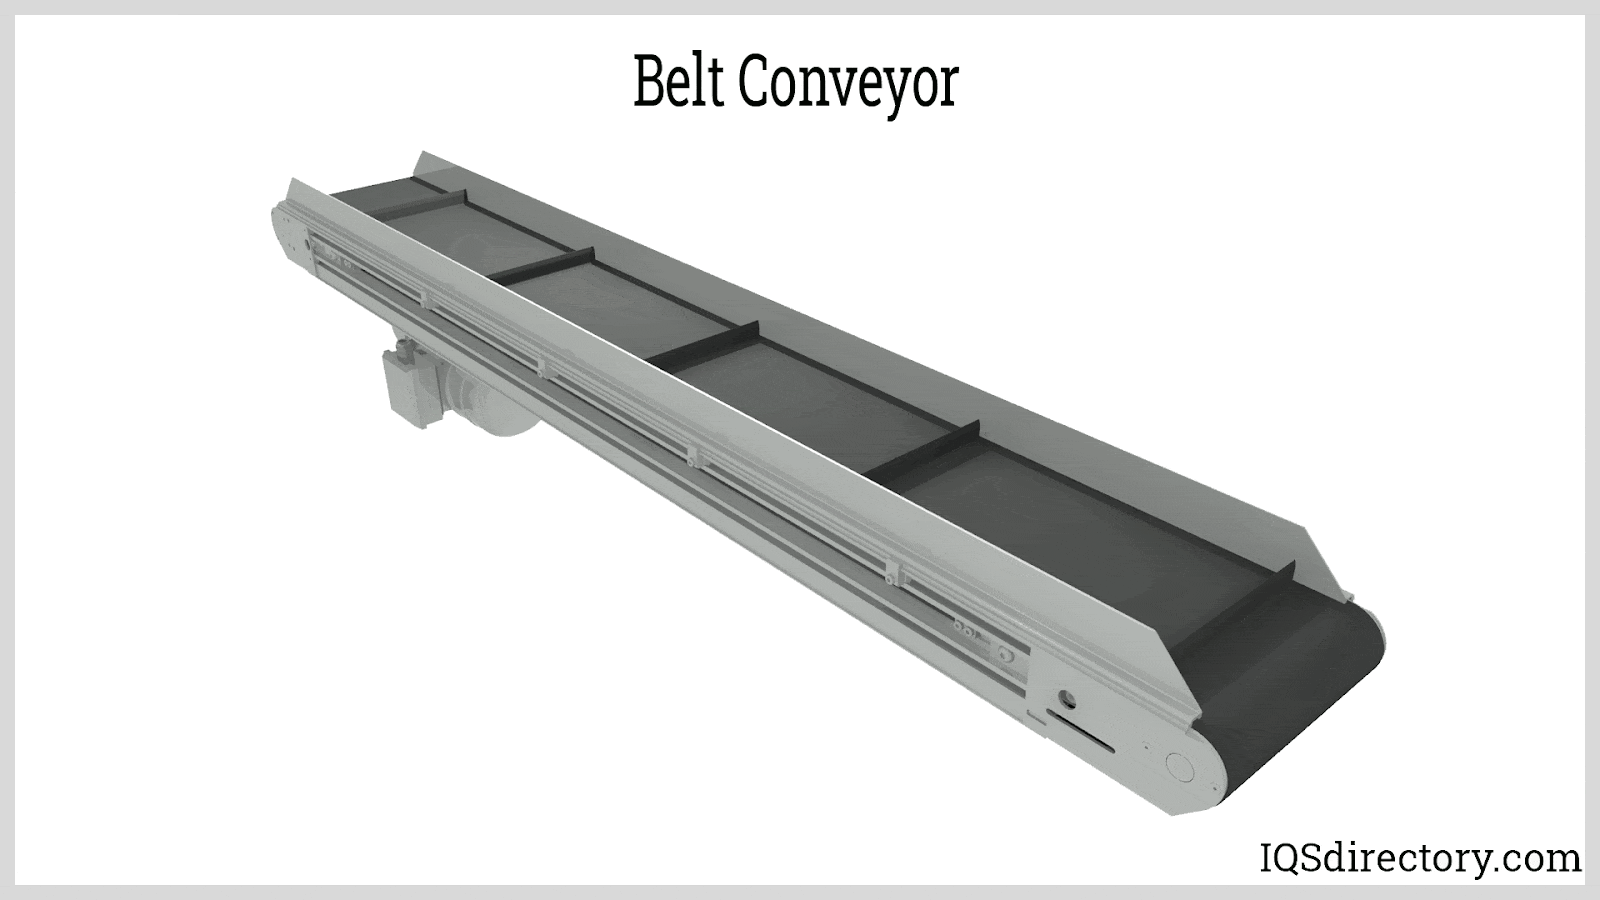 Common Belt Problems: Keeping Your Belt Drive Systems Running